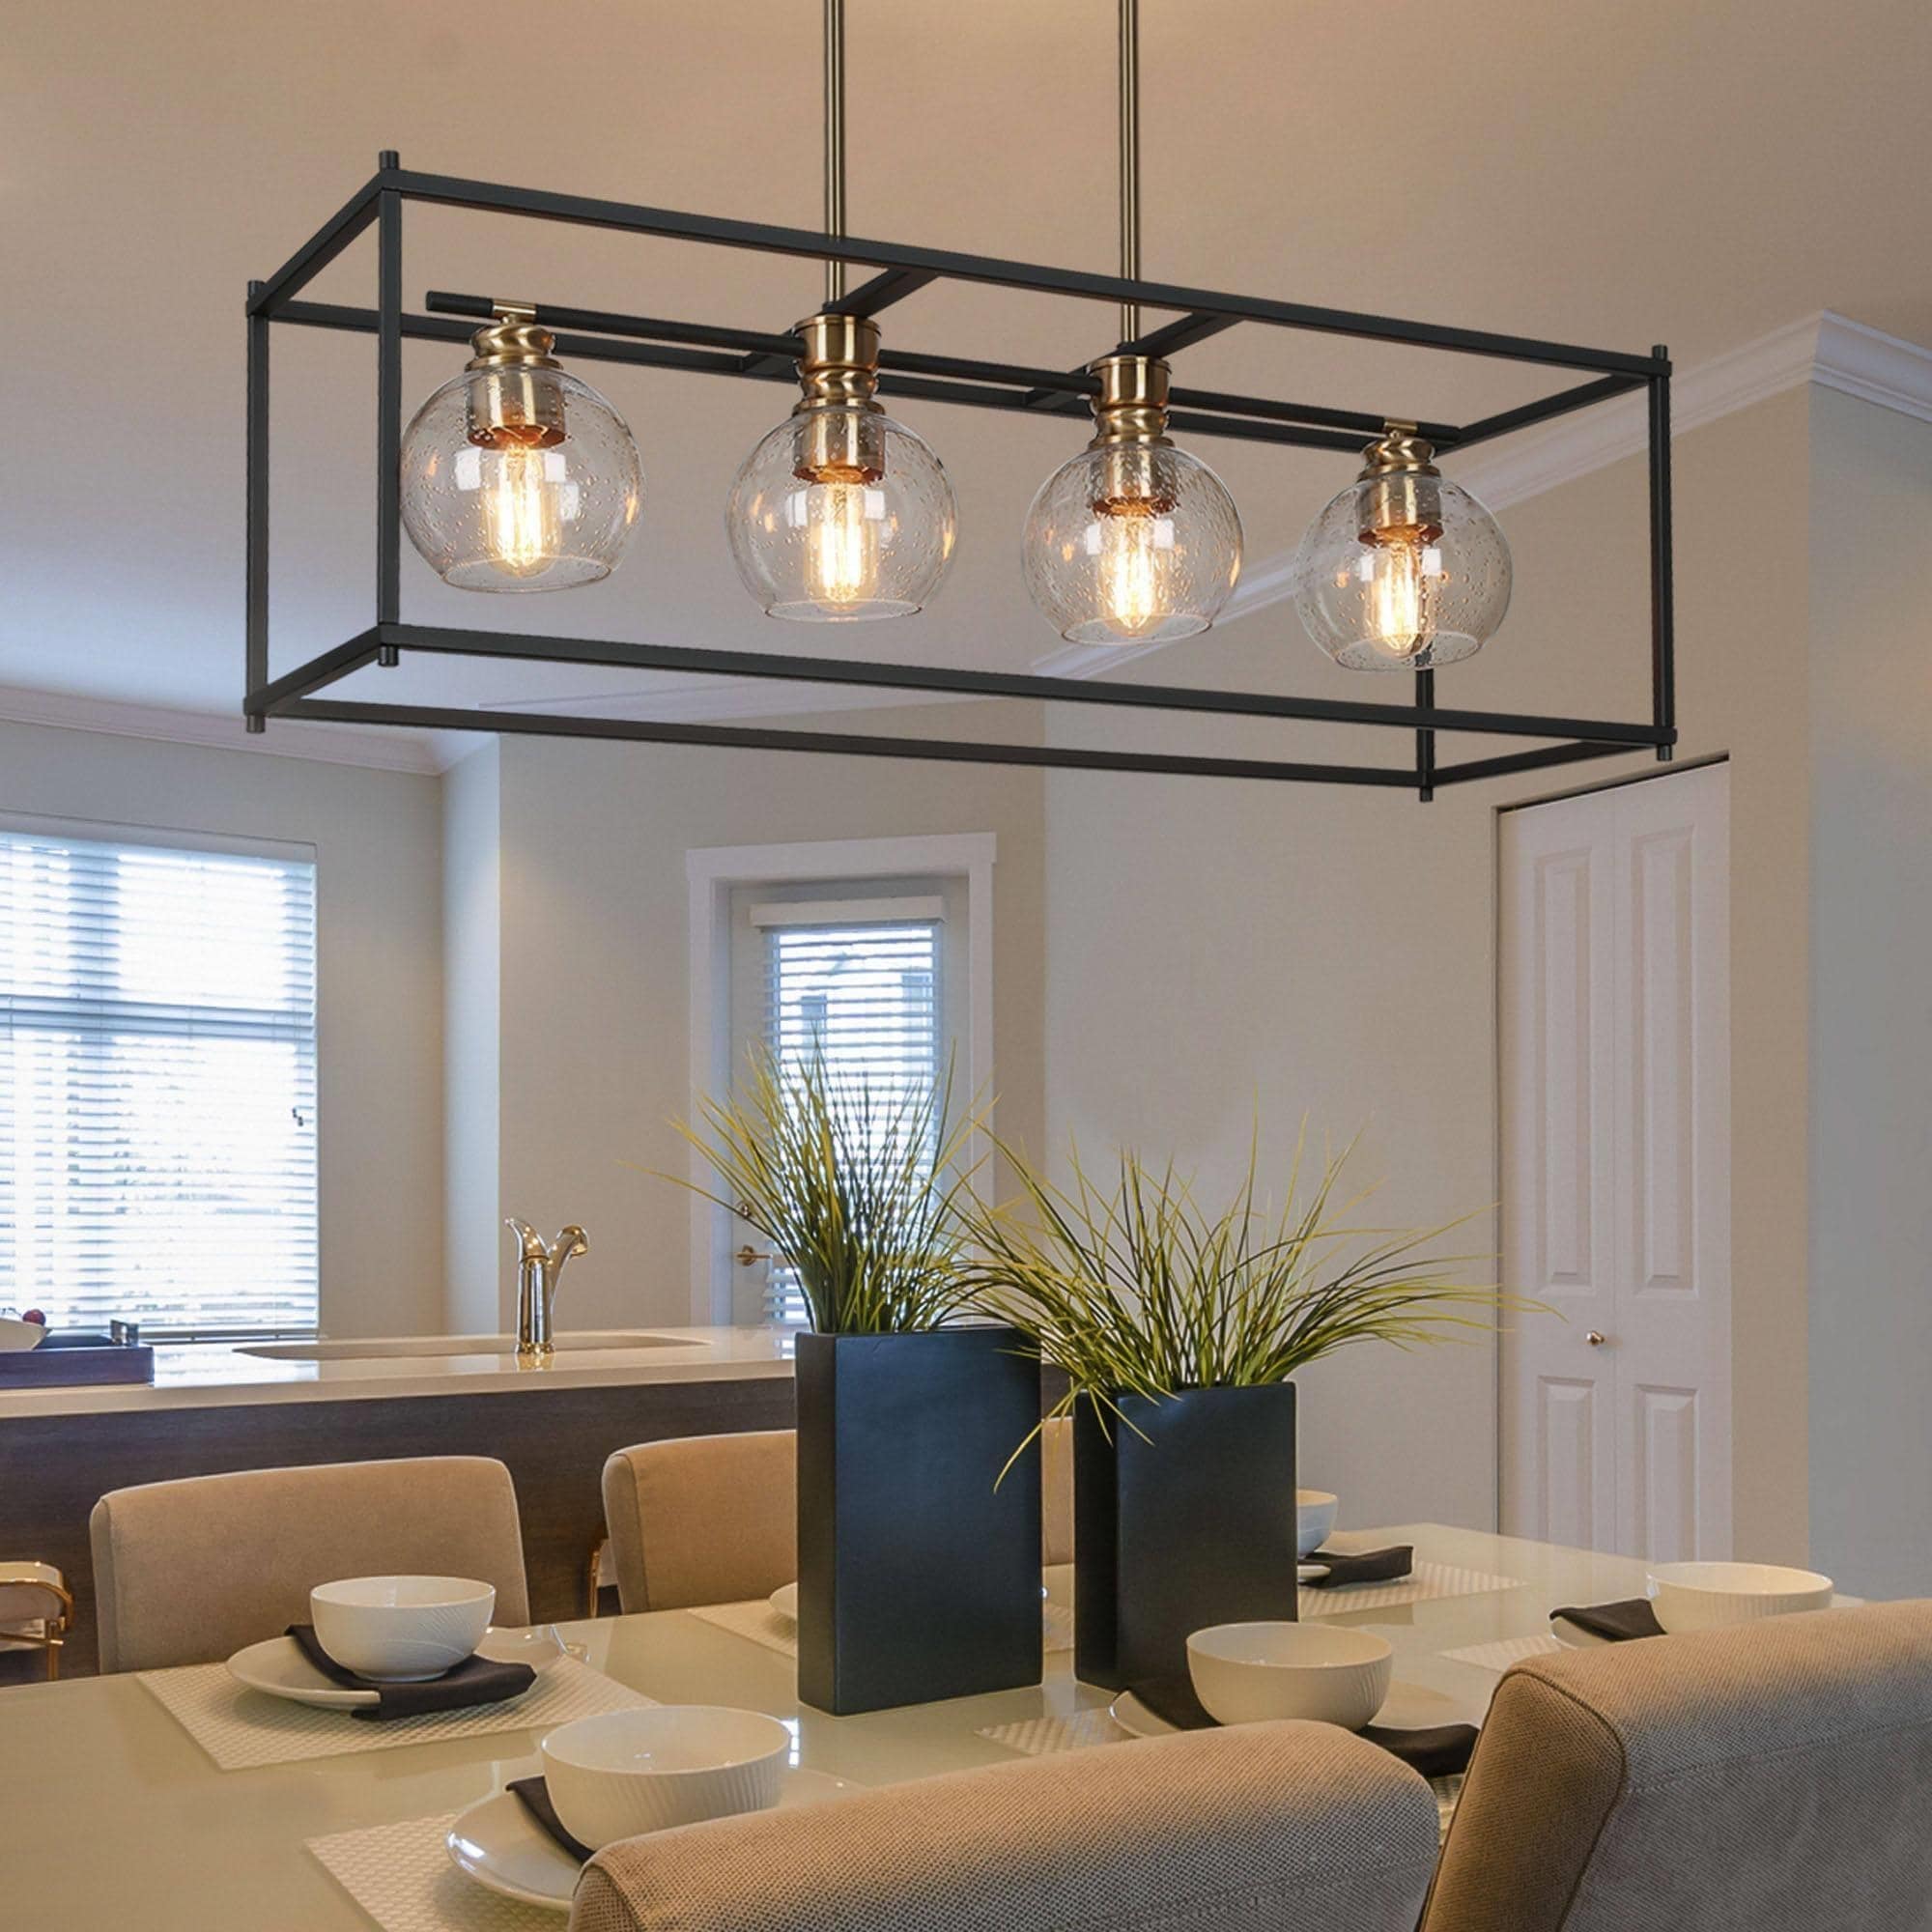 https://ak1.ostkcdn.com/images/products/is/images/direct/582c81b3af8c9444ff5481d6cc5d193f609ba74d/Iain-Modern-4-Light-Black-Gold-Chandelier-Rectangle-Island-Lights-for-Dining-Room.jpg